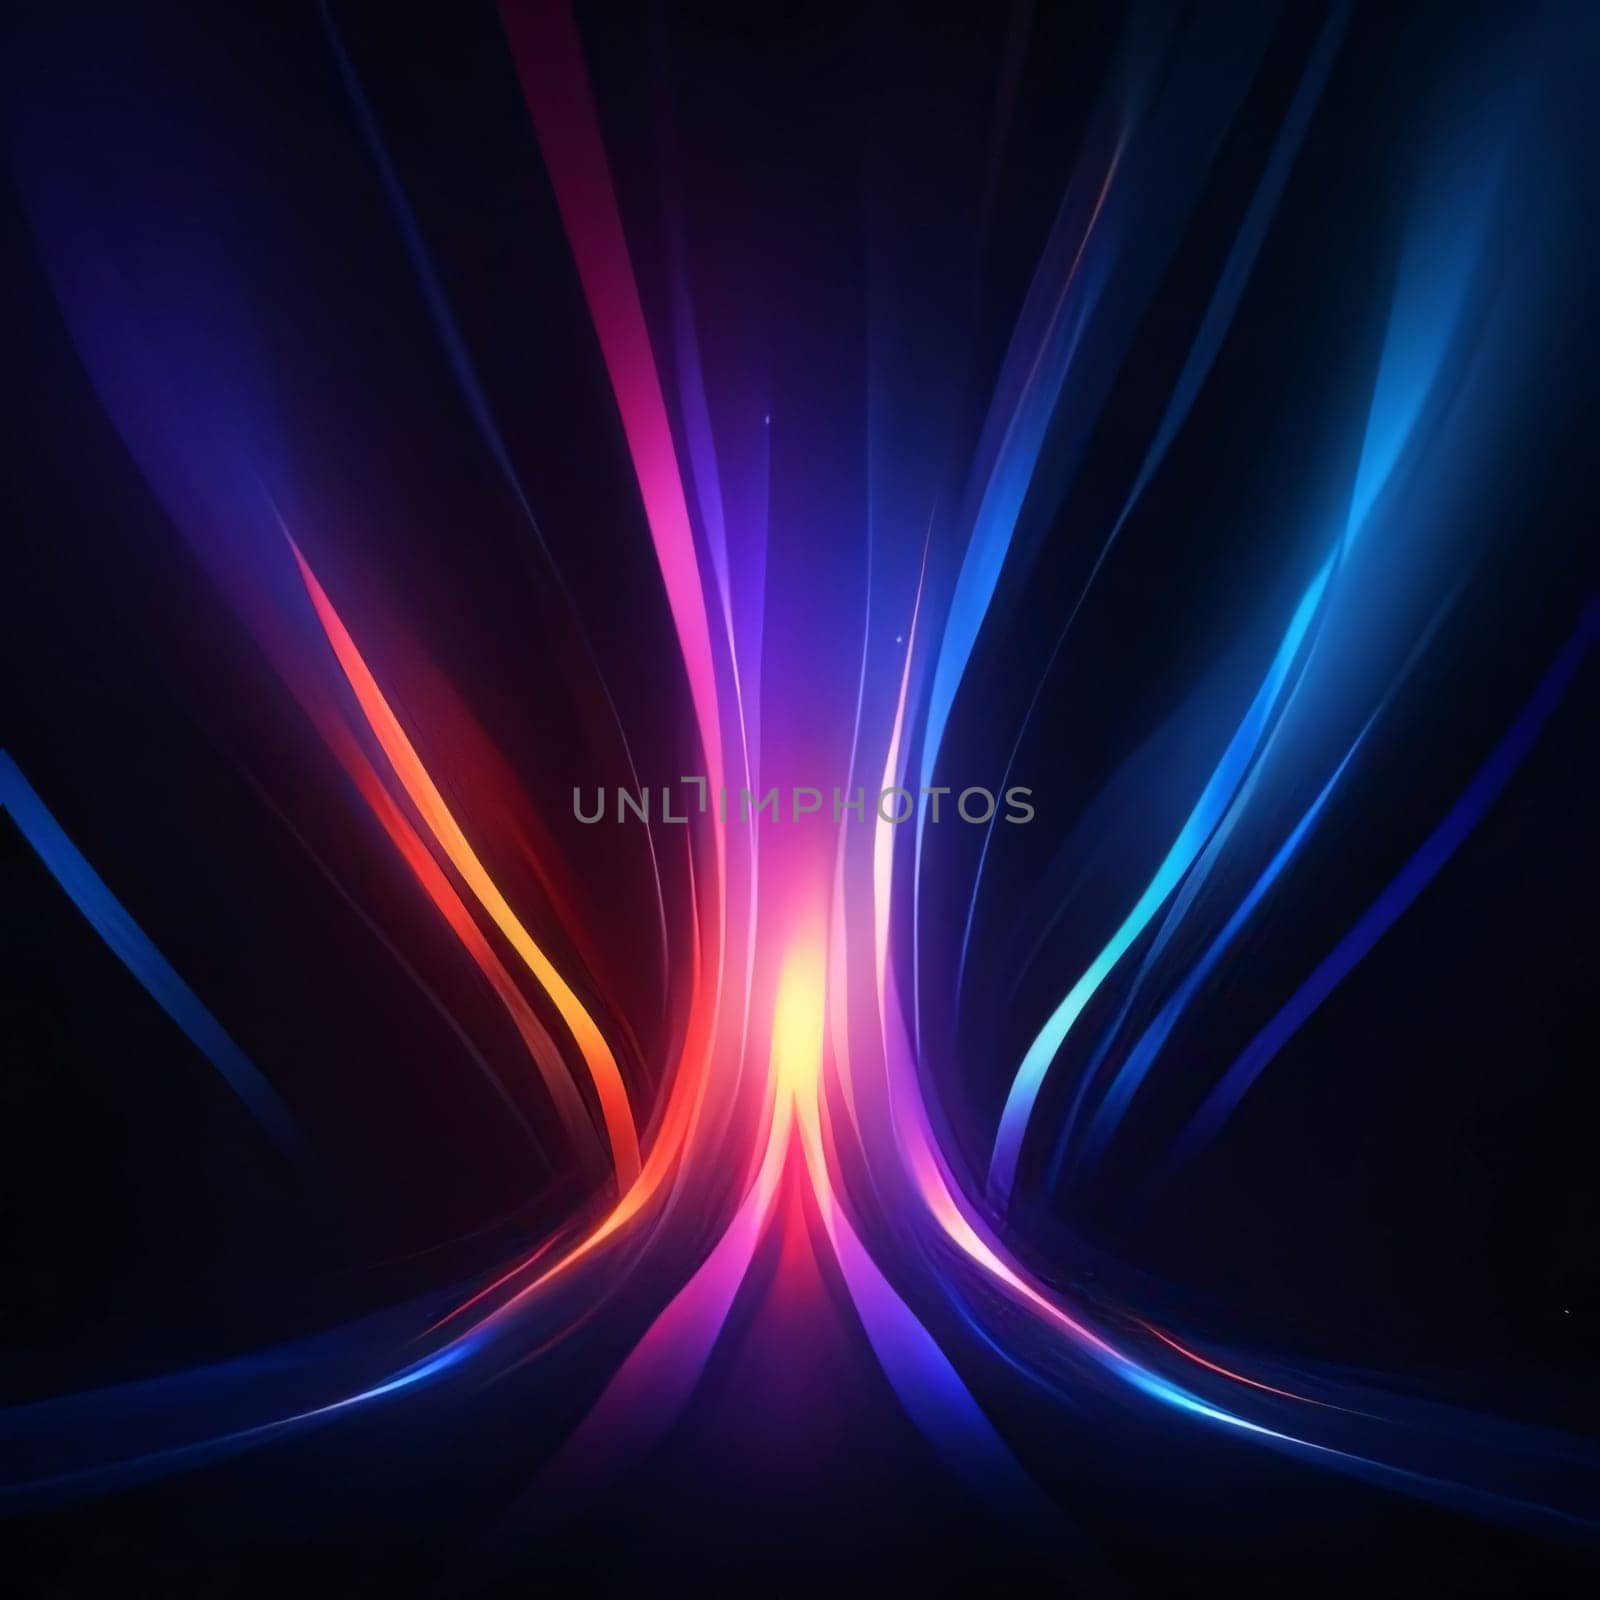 Abstract background design: Abstract background with glowing lines and space for your message. Vector illustration